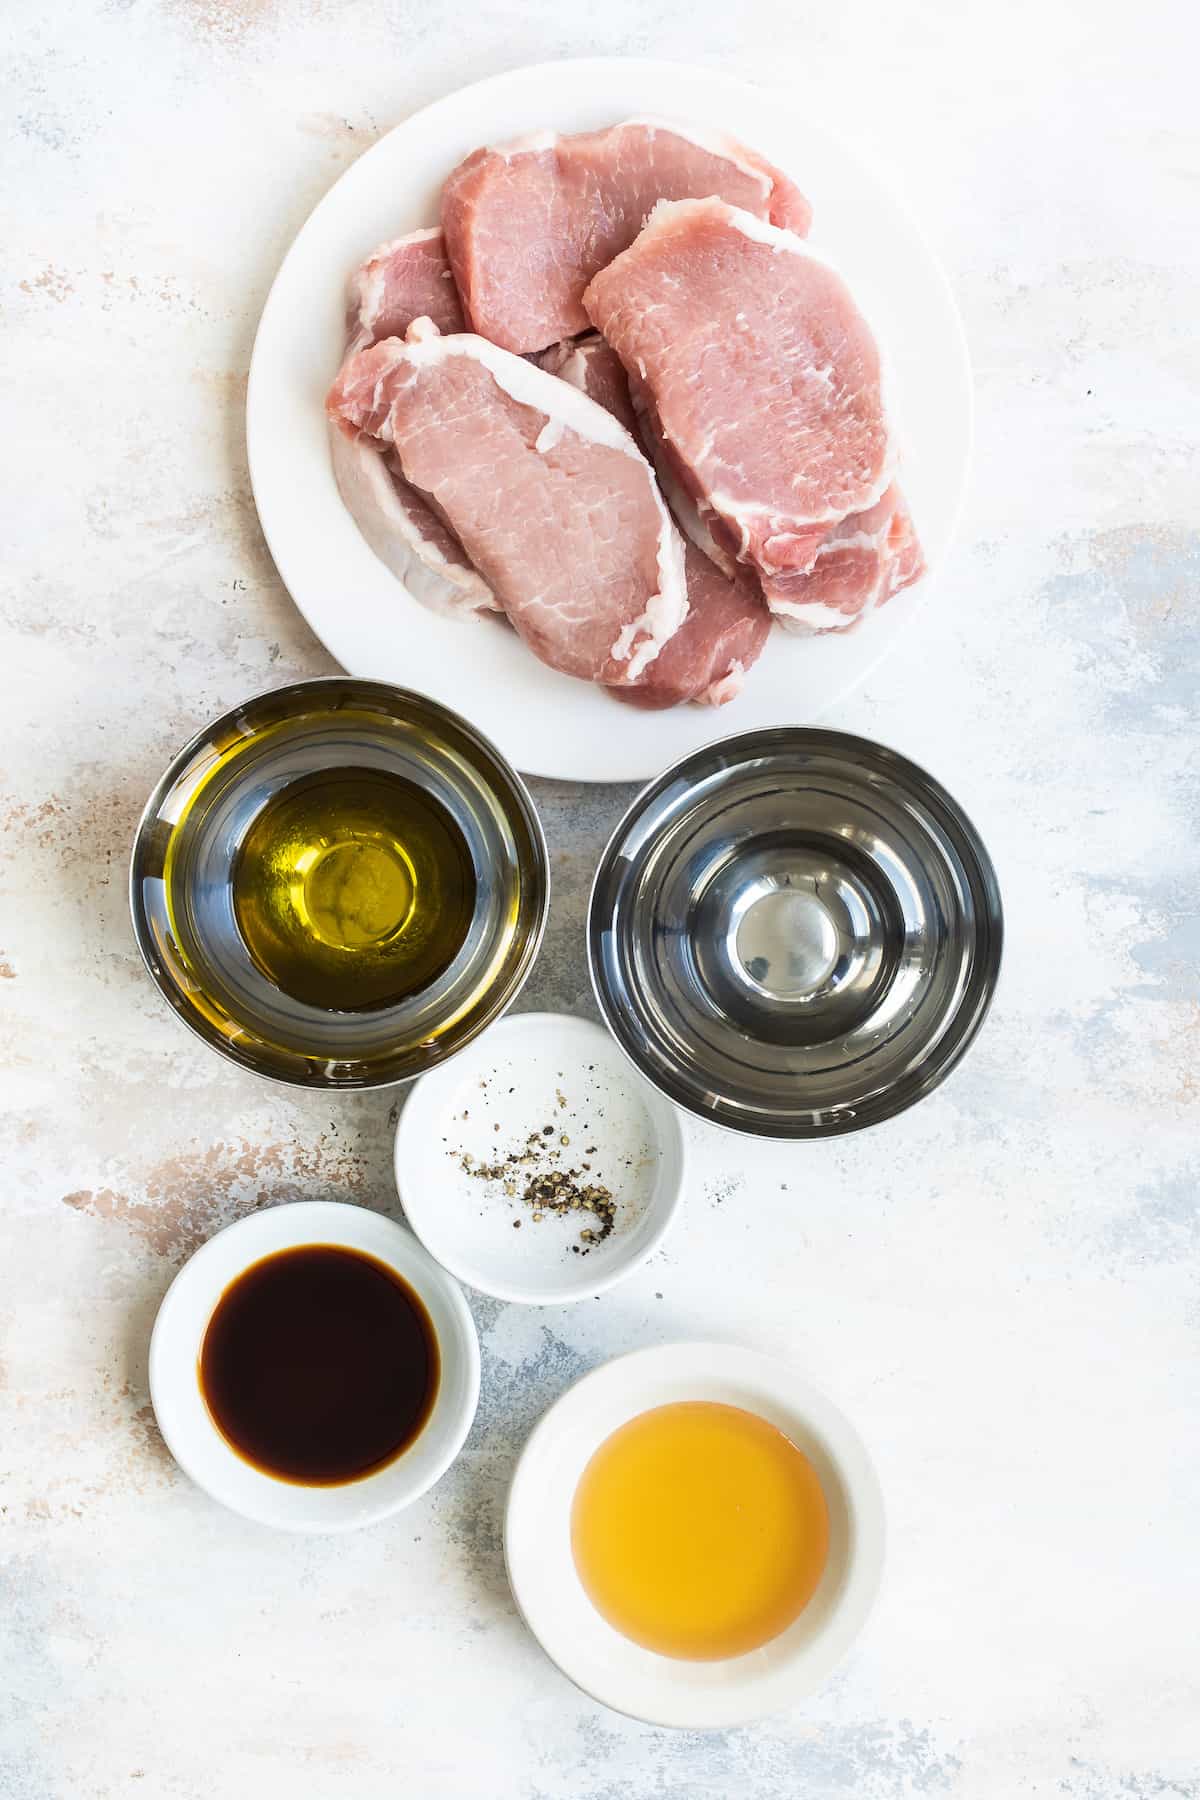 Pork Chops, Salt, Pepper and the Rest of the Ingredients on a Countertop